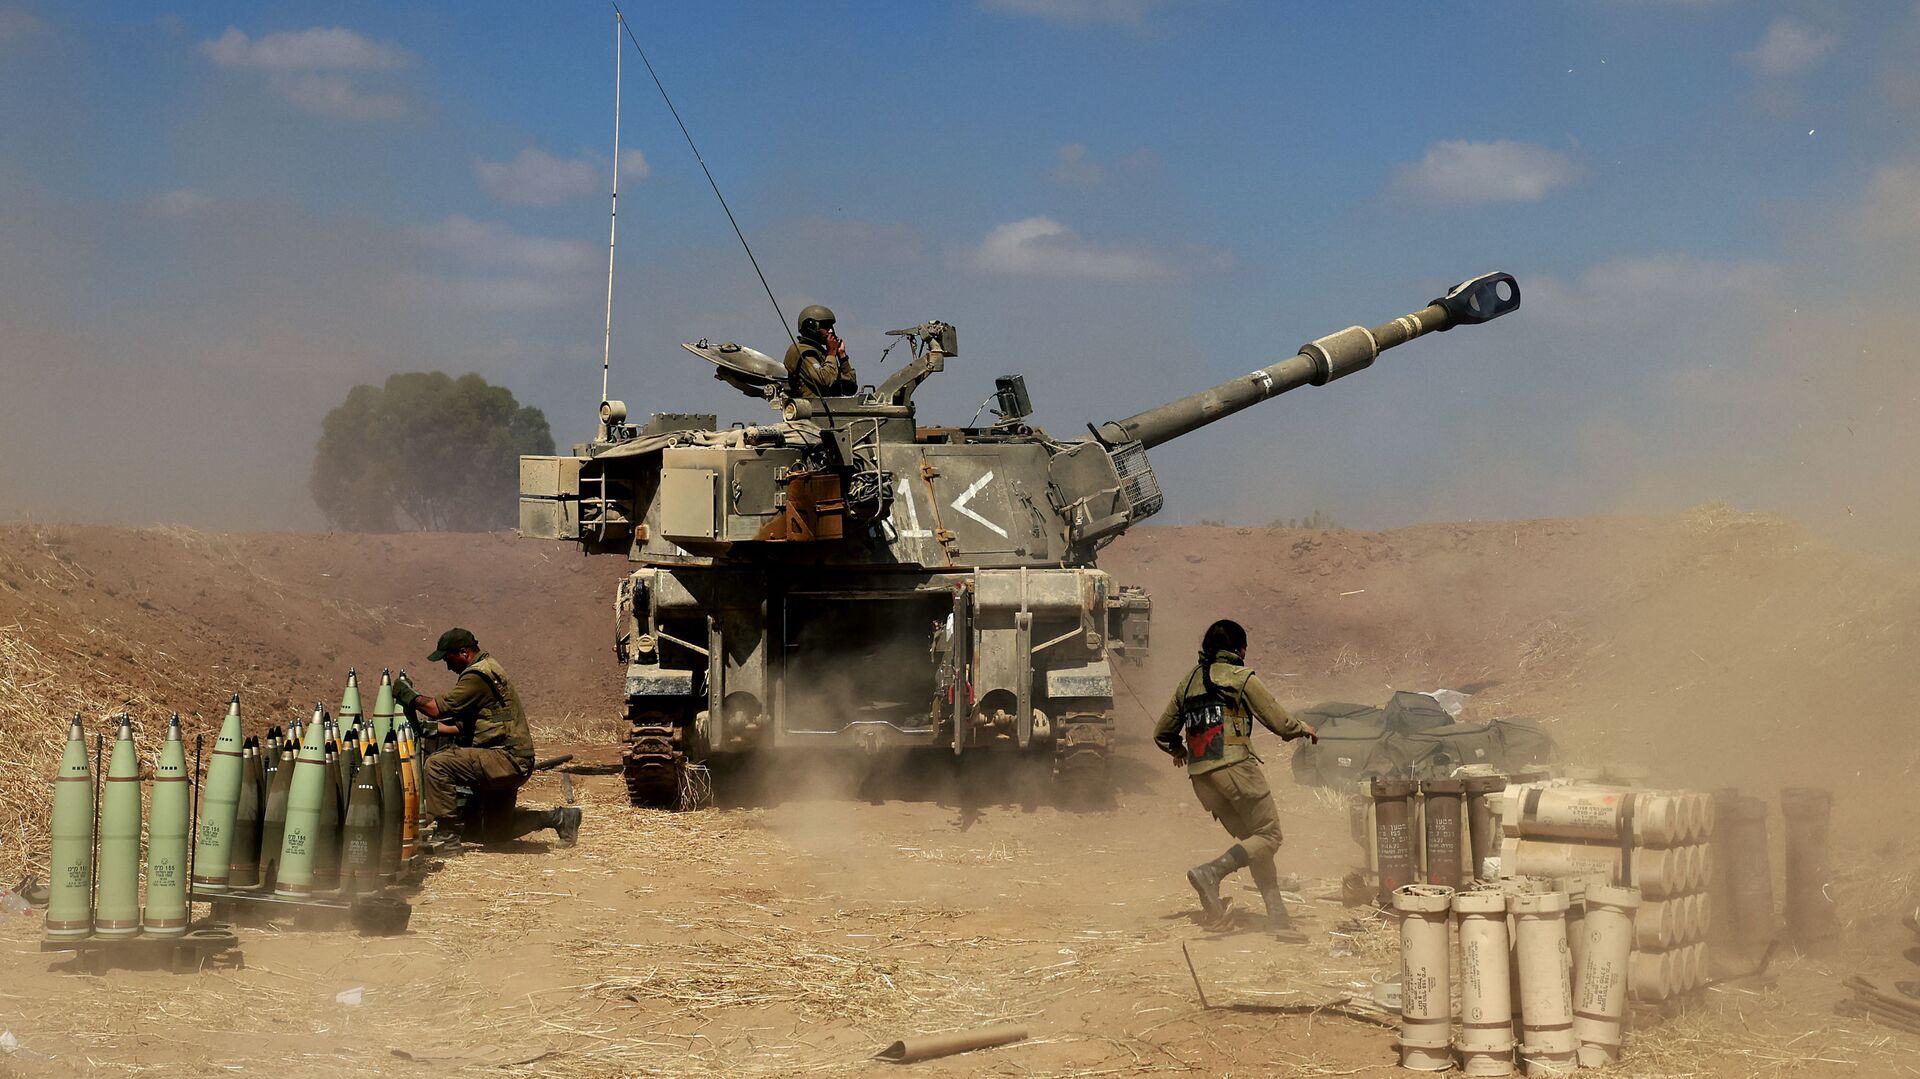 Israeli soldiers fire a 155mm self-propelled howitzer towards the Gaza Strip from their position near the southern Israeli city of Sderot on May 13, 2021. - Israel faced an escalating conflict on two fronts, scrambling to quell riots between Arabs and Jews on its own streets after days of exchanging deadly fire with Palestinian militants in Gaza. - Sputnik International, 1920, 27.03.2022